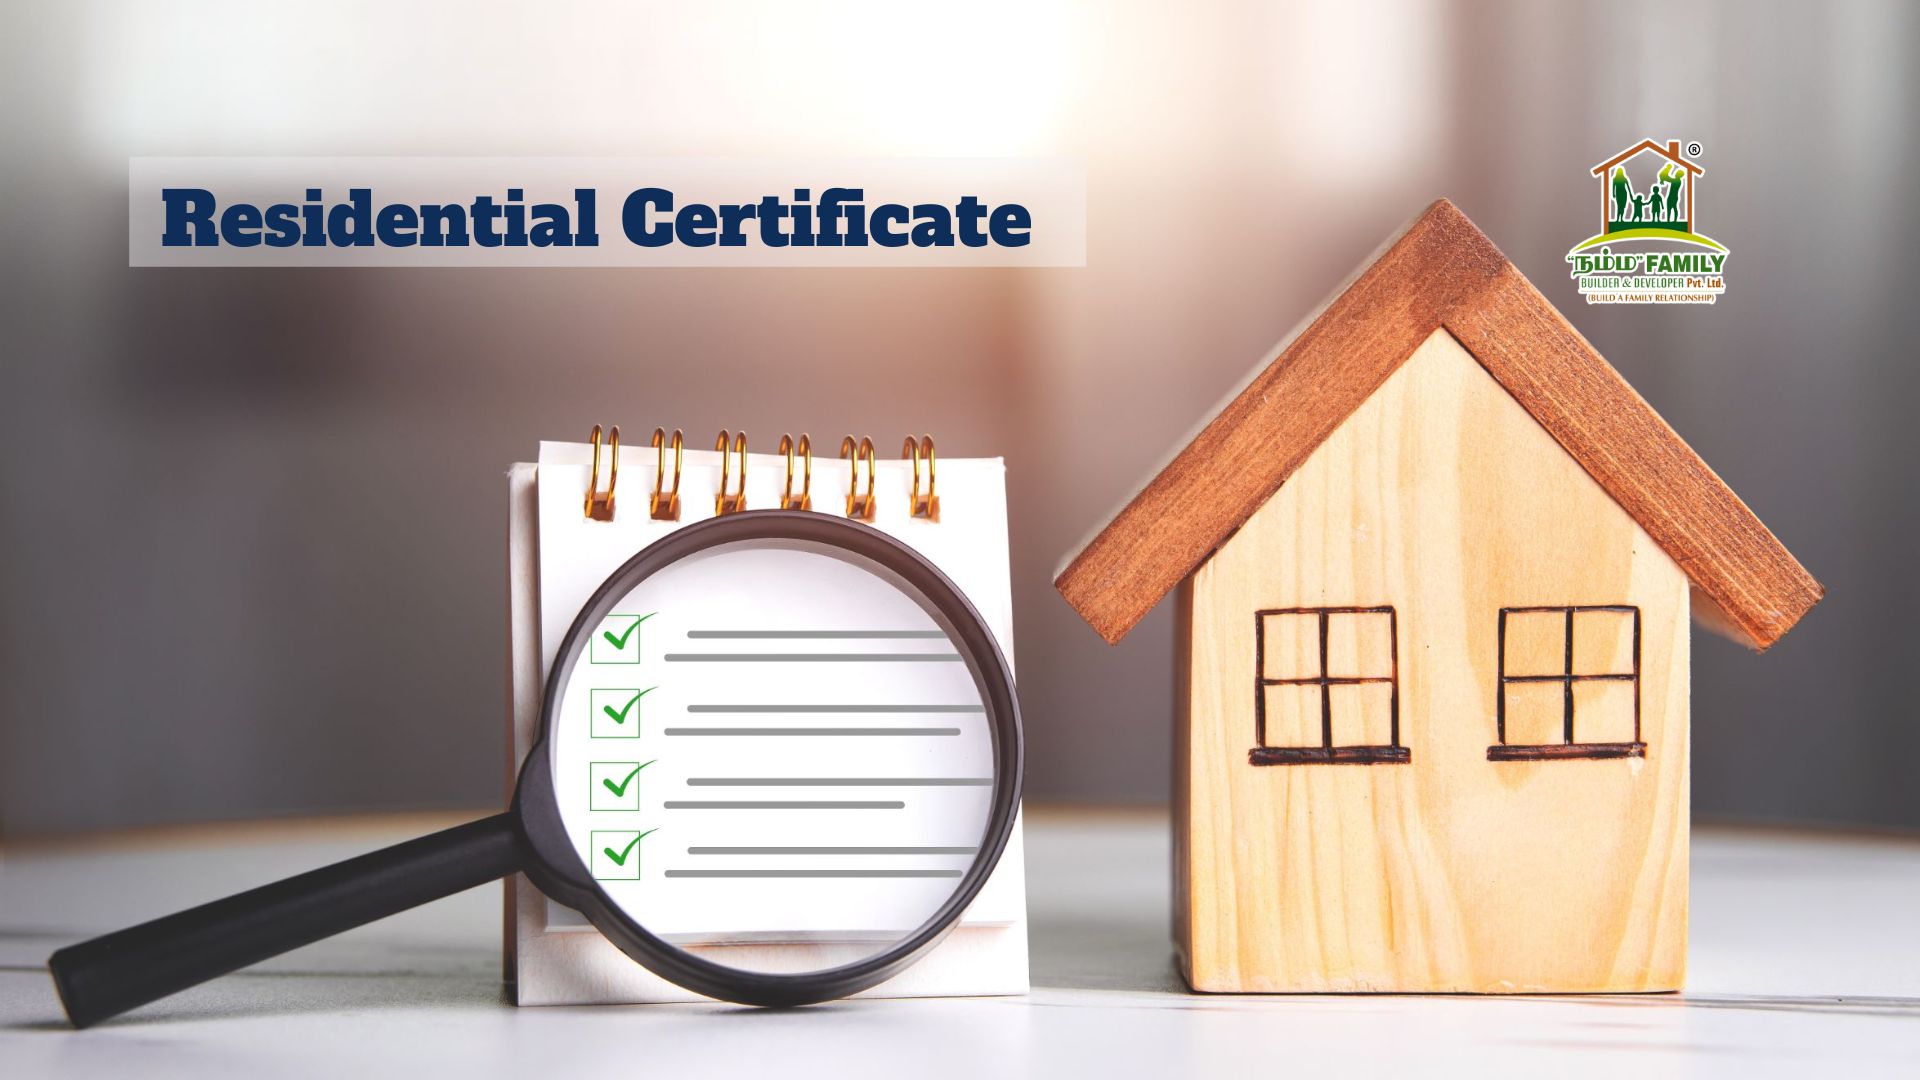 How To Apply For a Residential Certificate Online? - Namma Family Builder